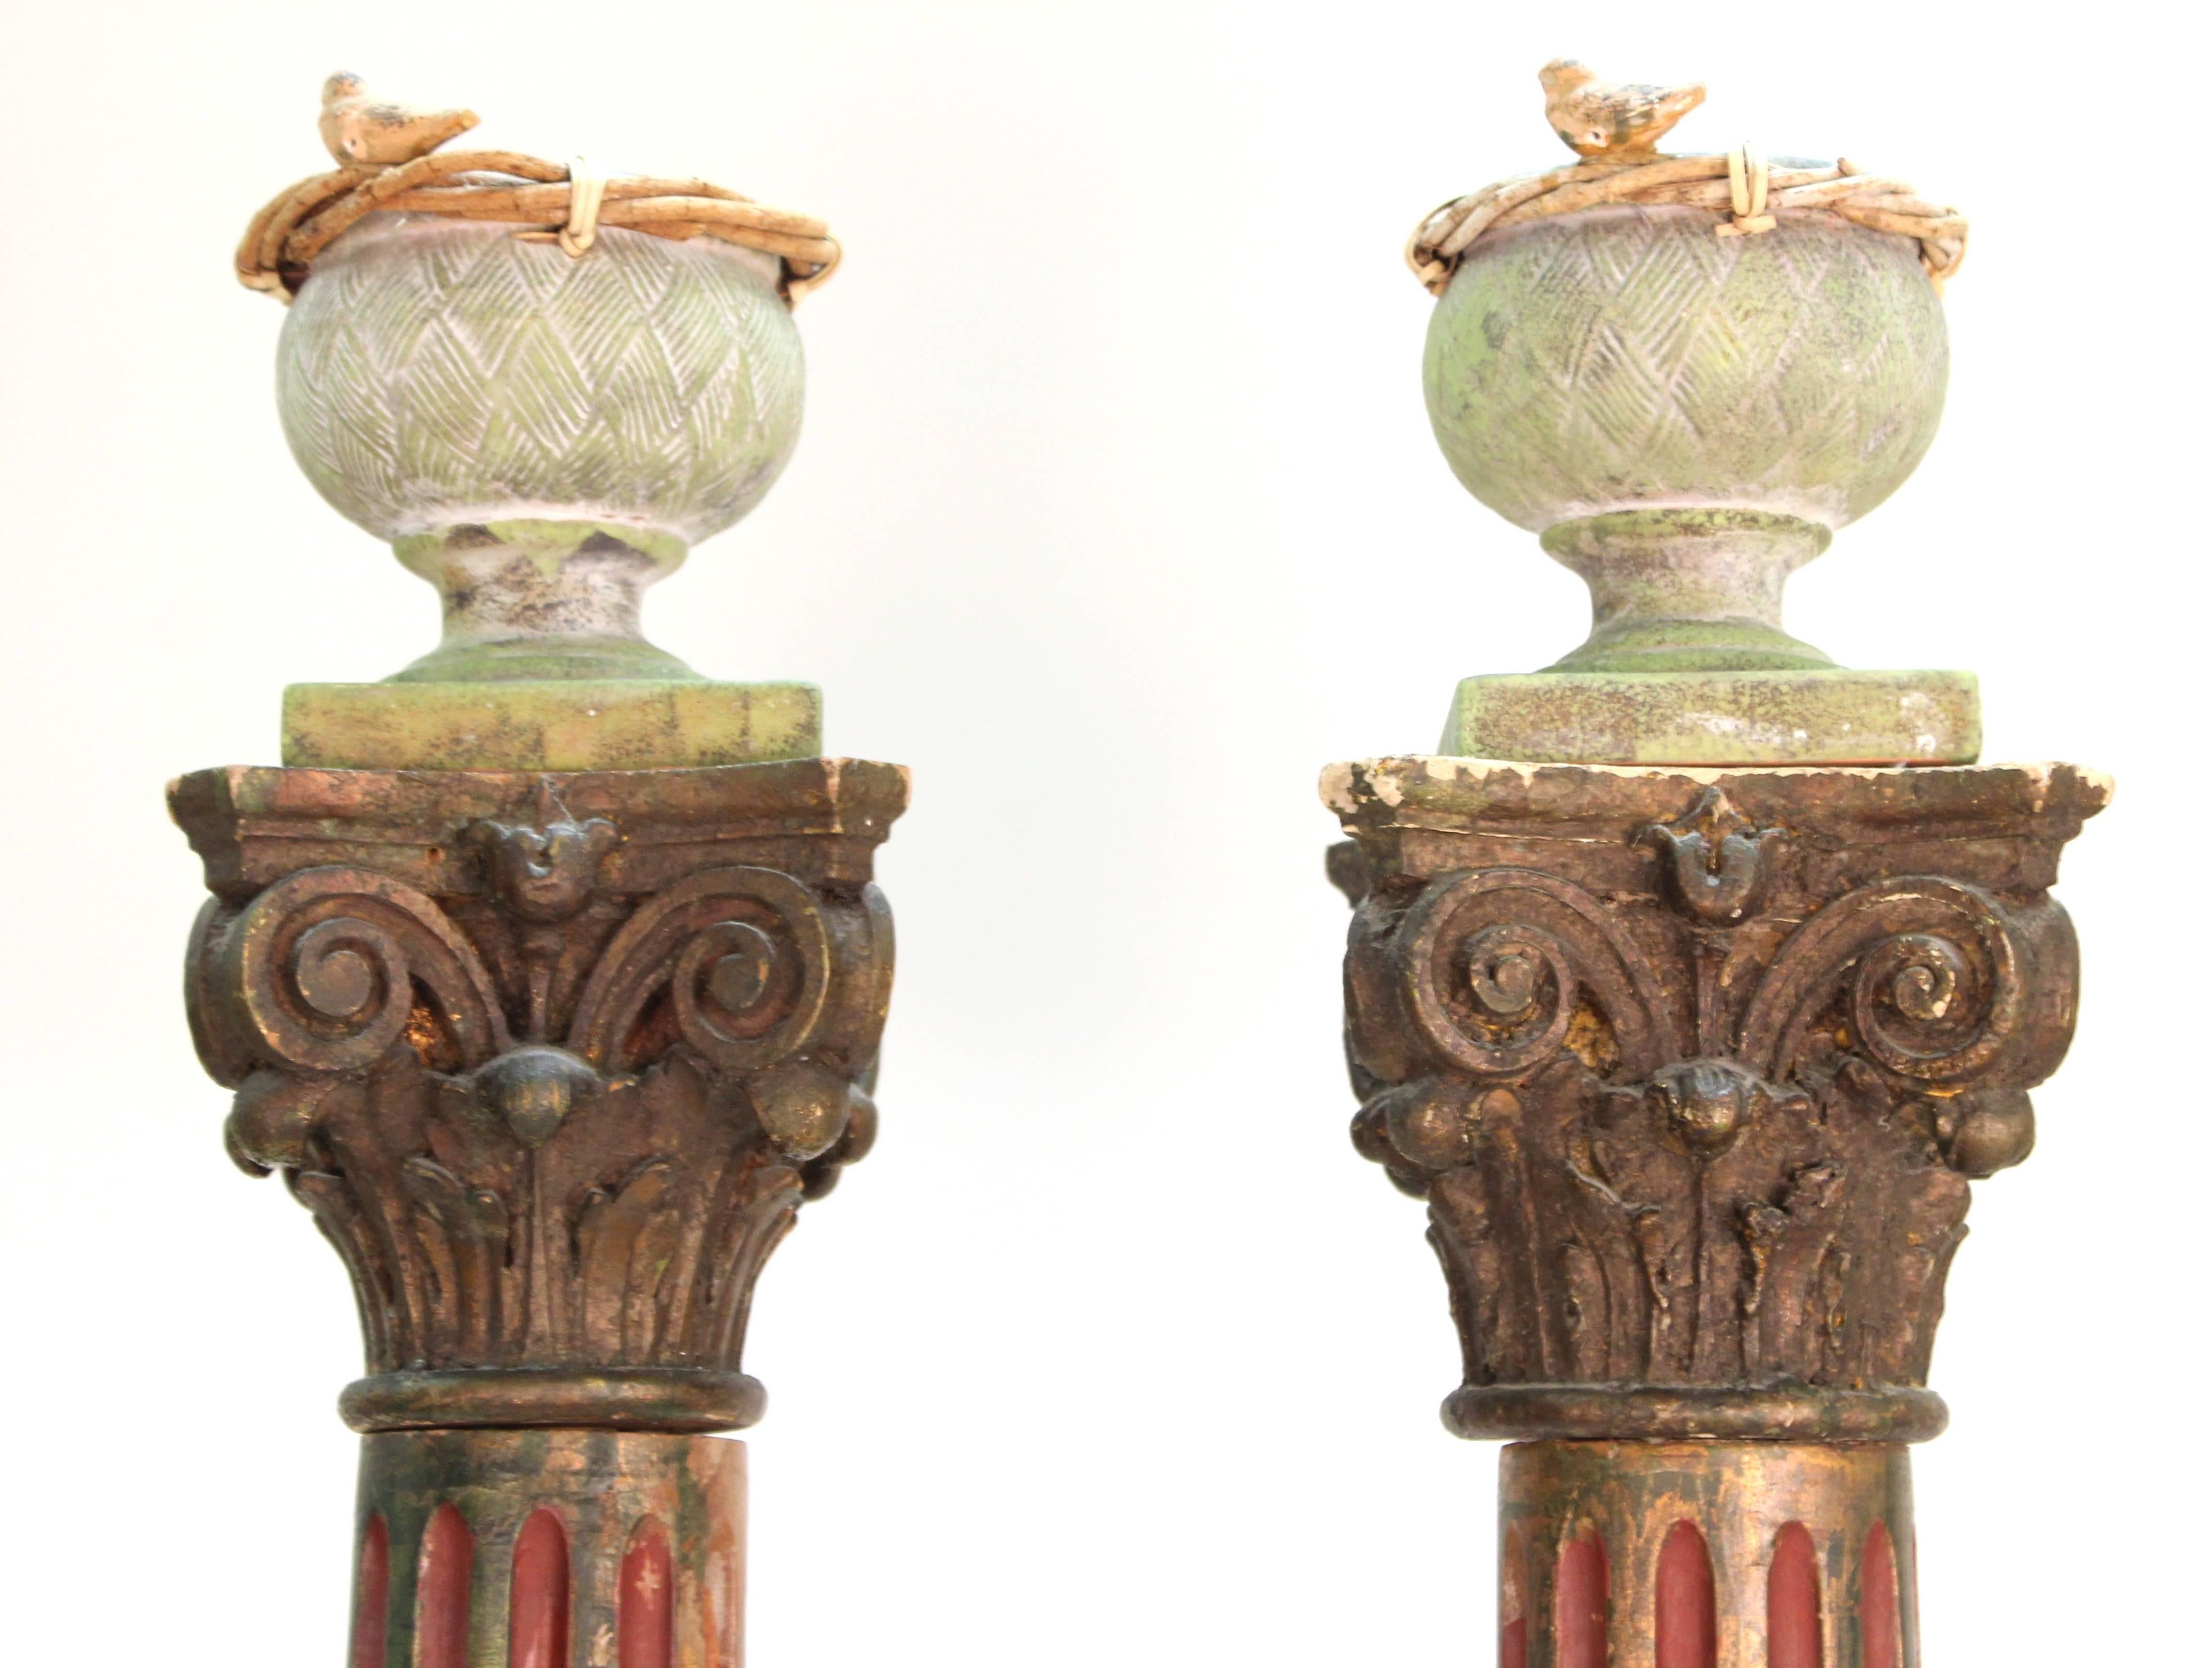 Painted wooden Victorian columns in the Corinthian style with bird nests on top feature black square bases, a red and black fluted shaft, and black capital with curling acanthus leaves. Each column is topped with a ceramic green urn with bird